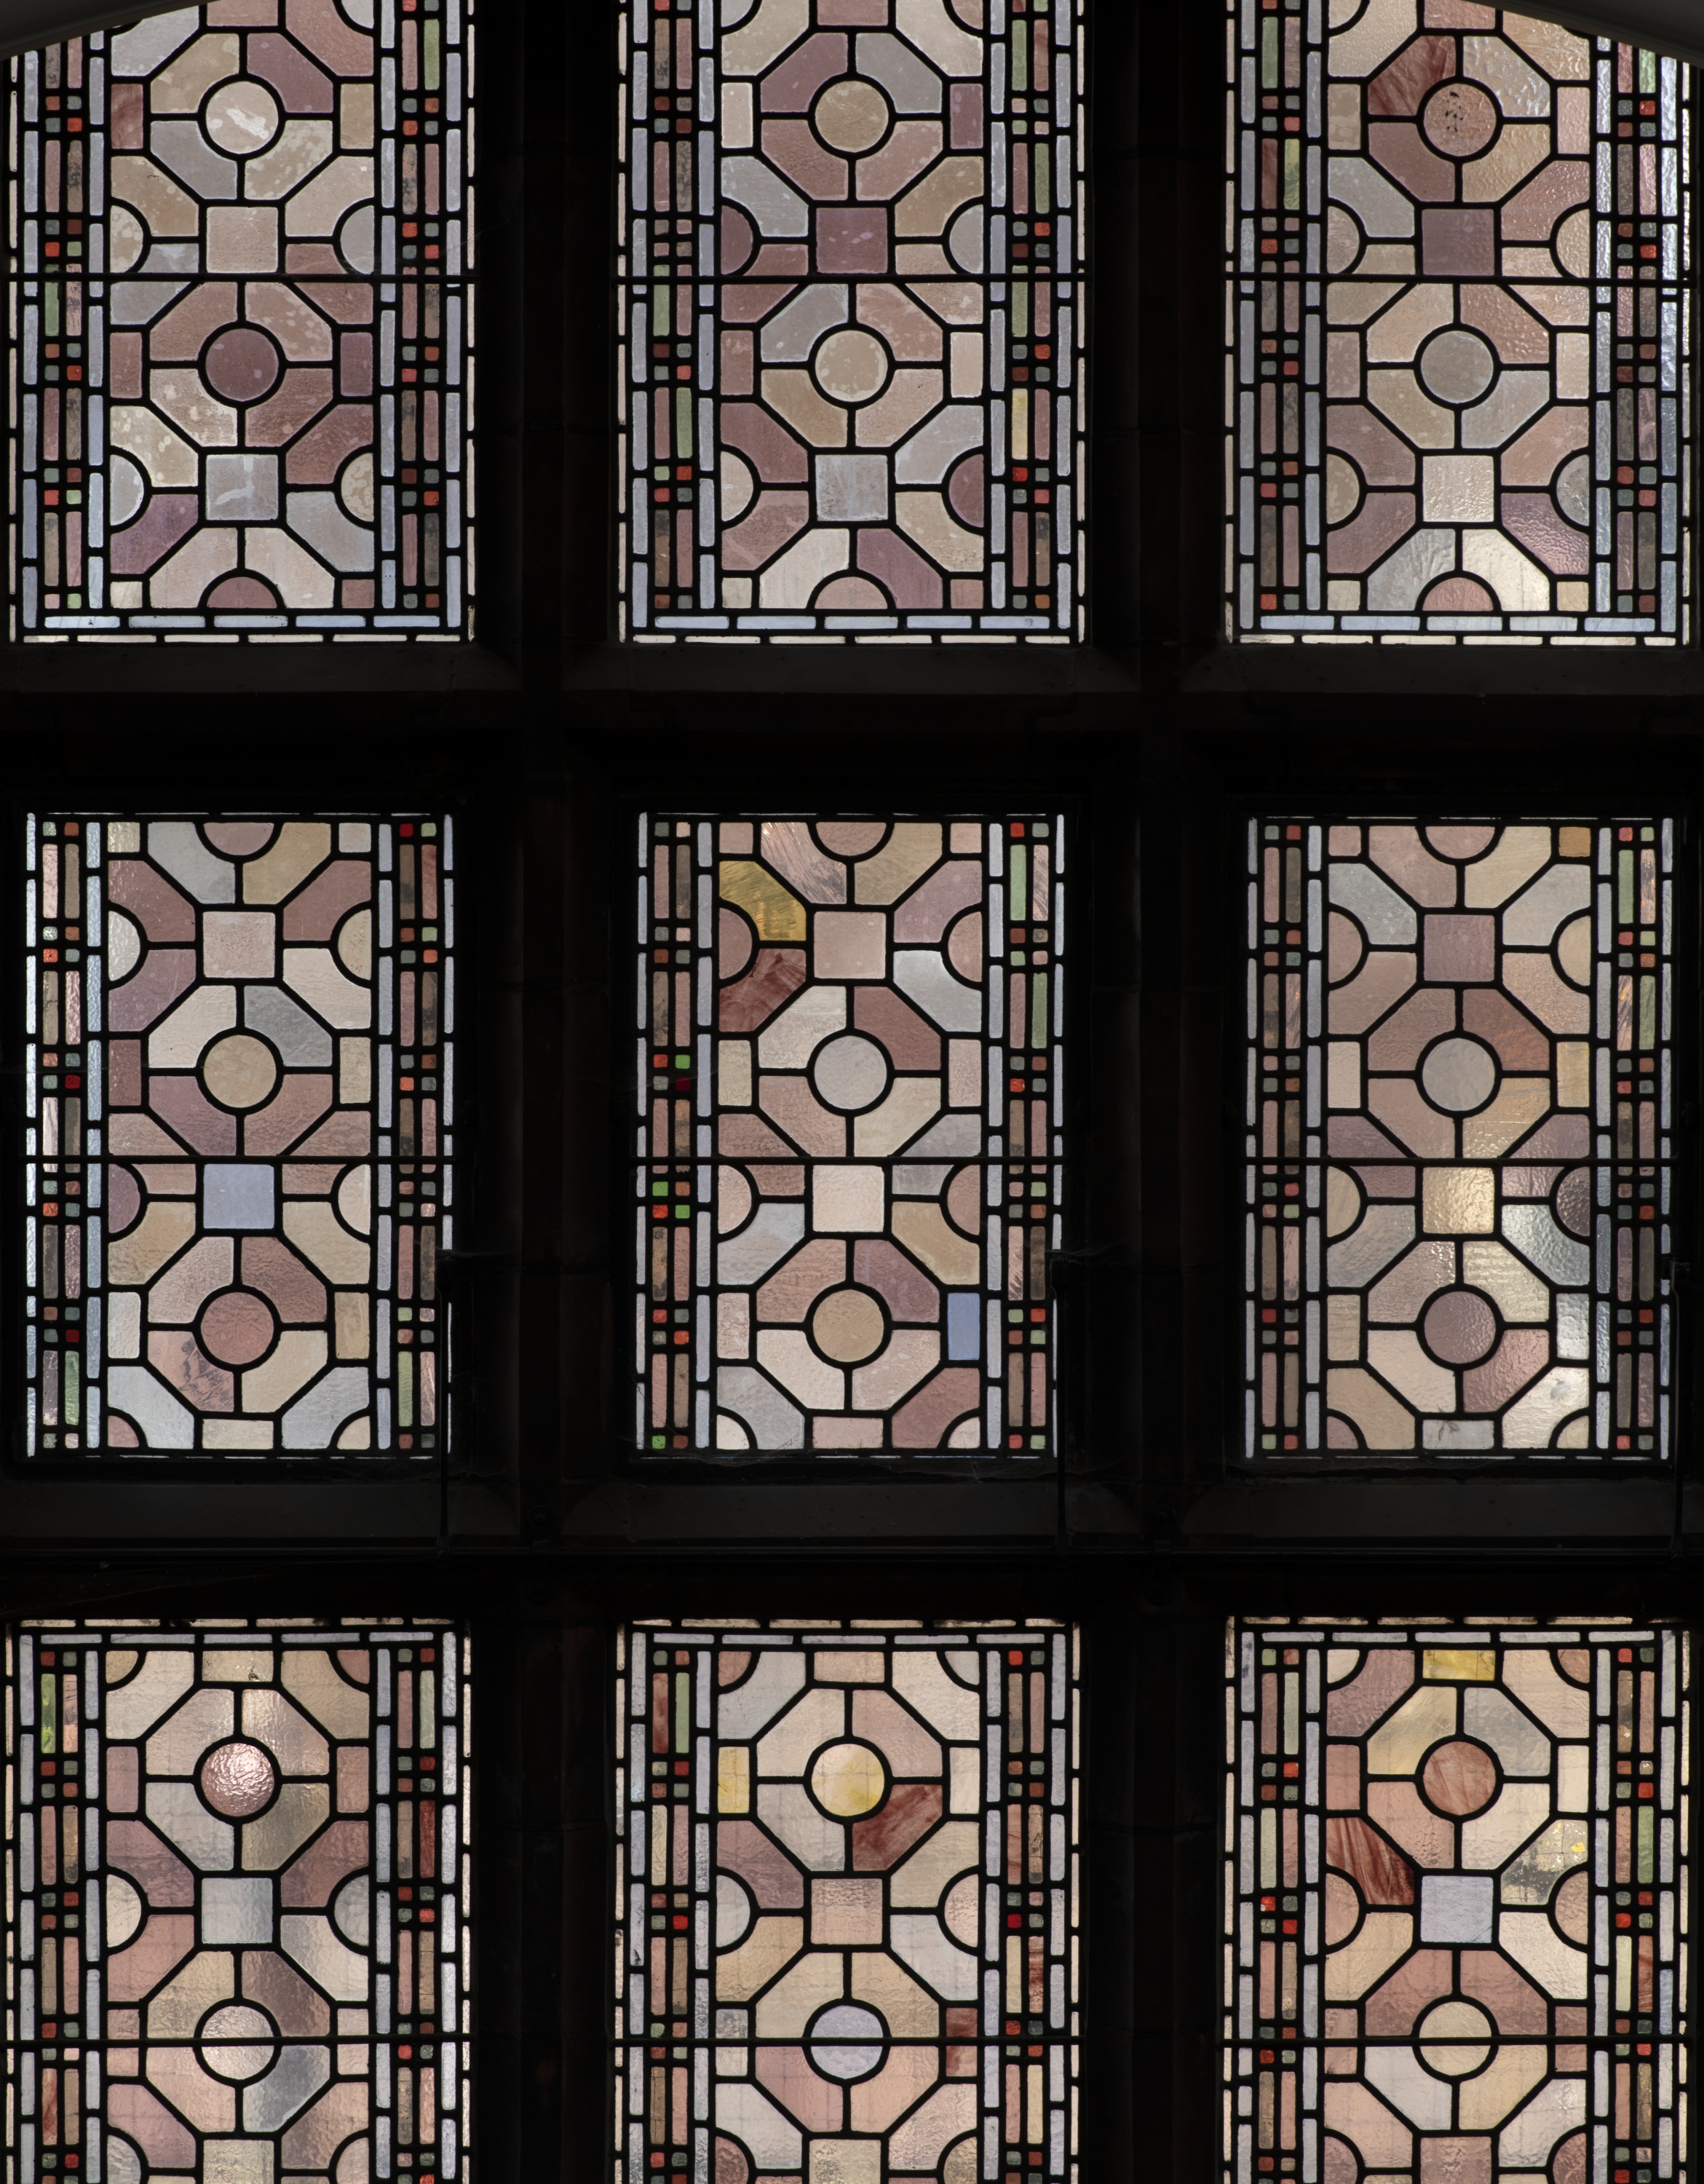 the photograph shows geometric stained glass in muted colours.